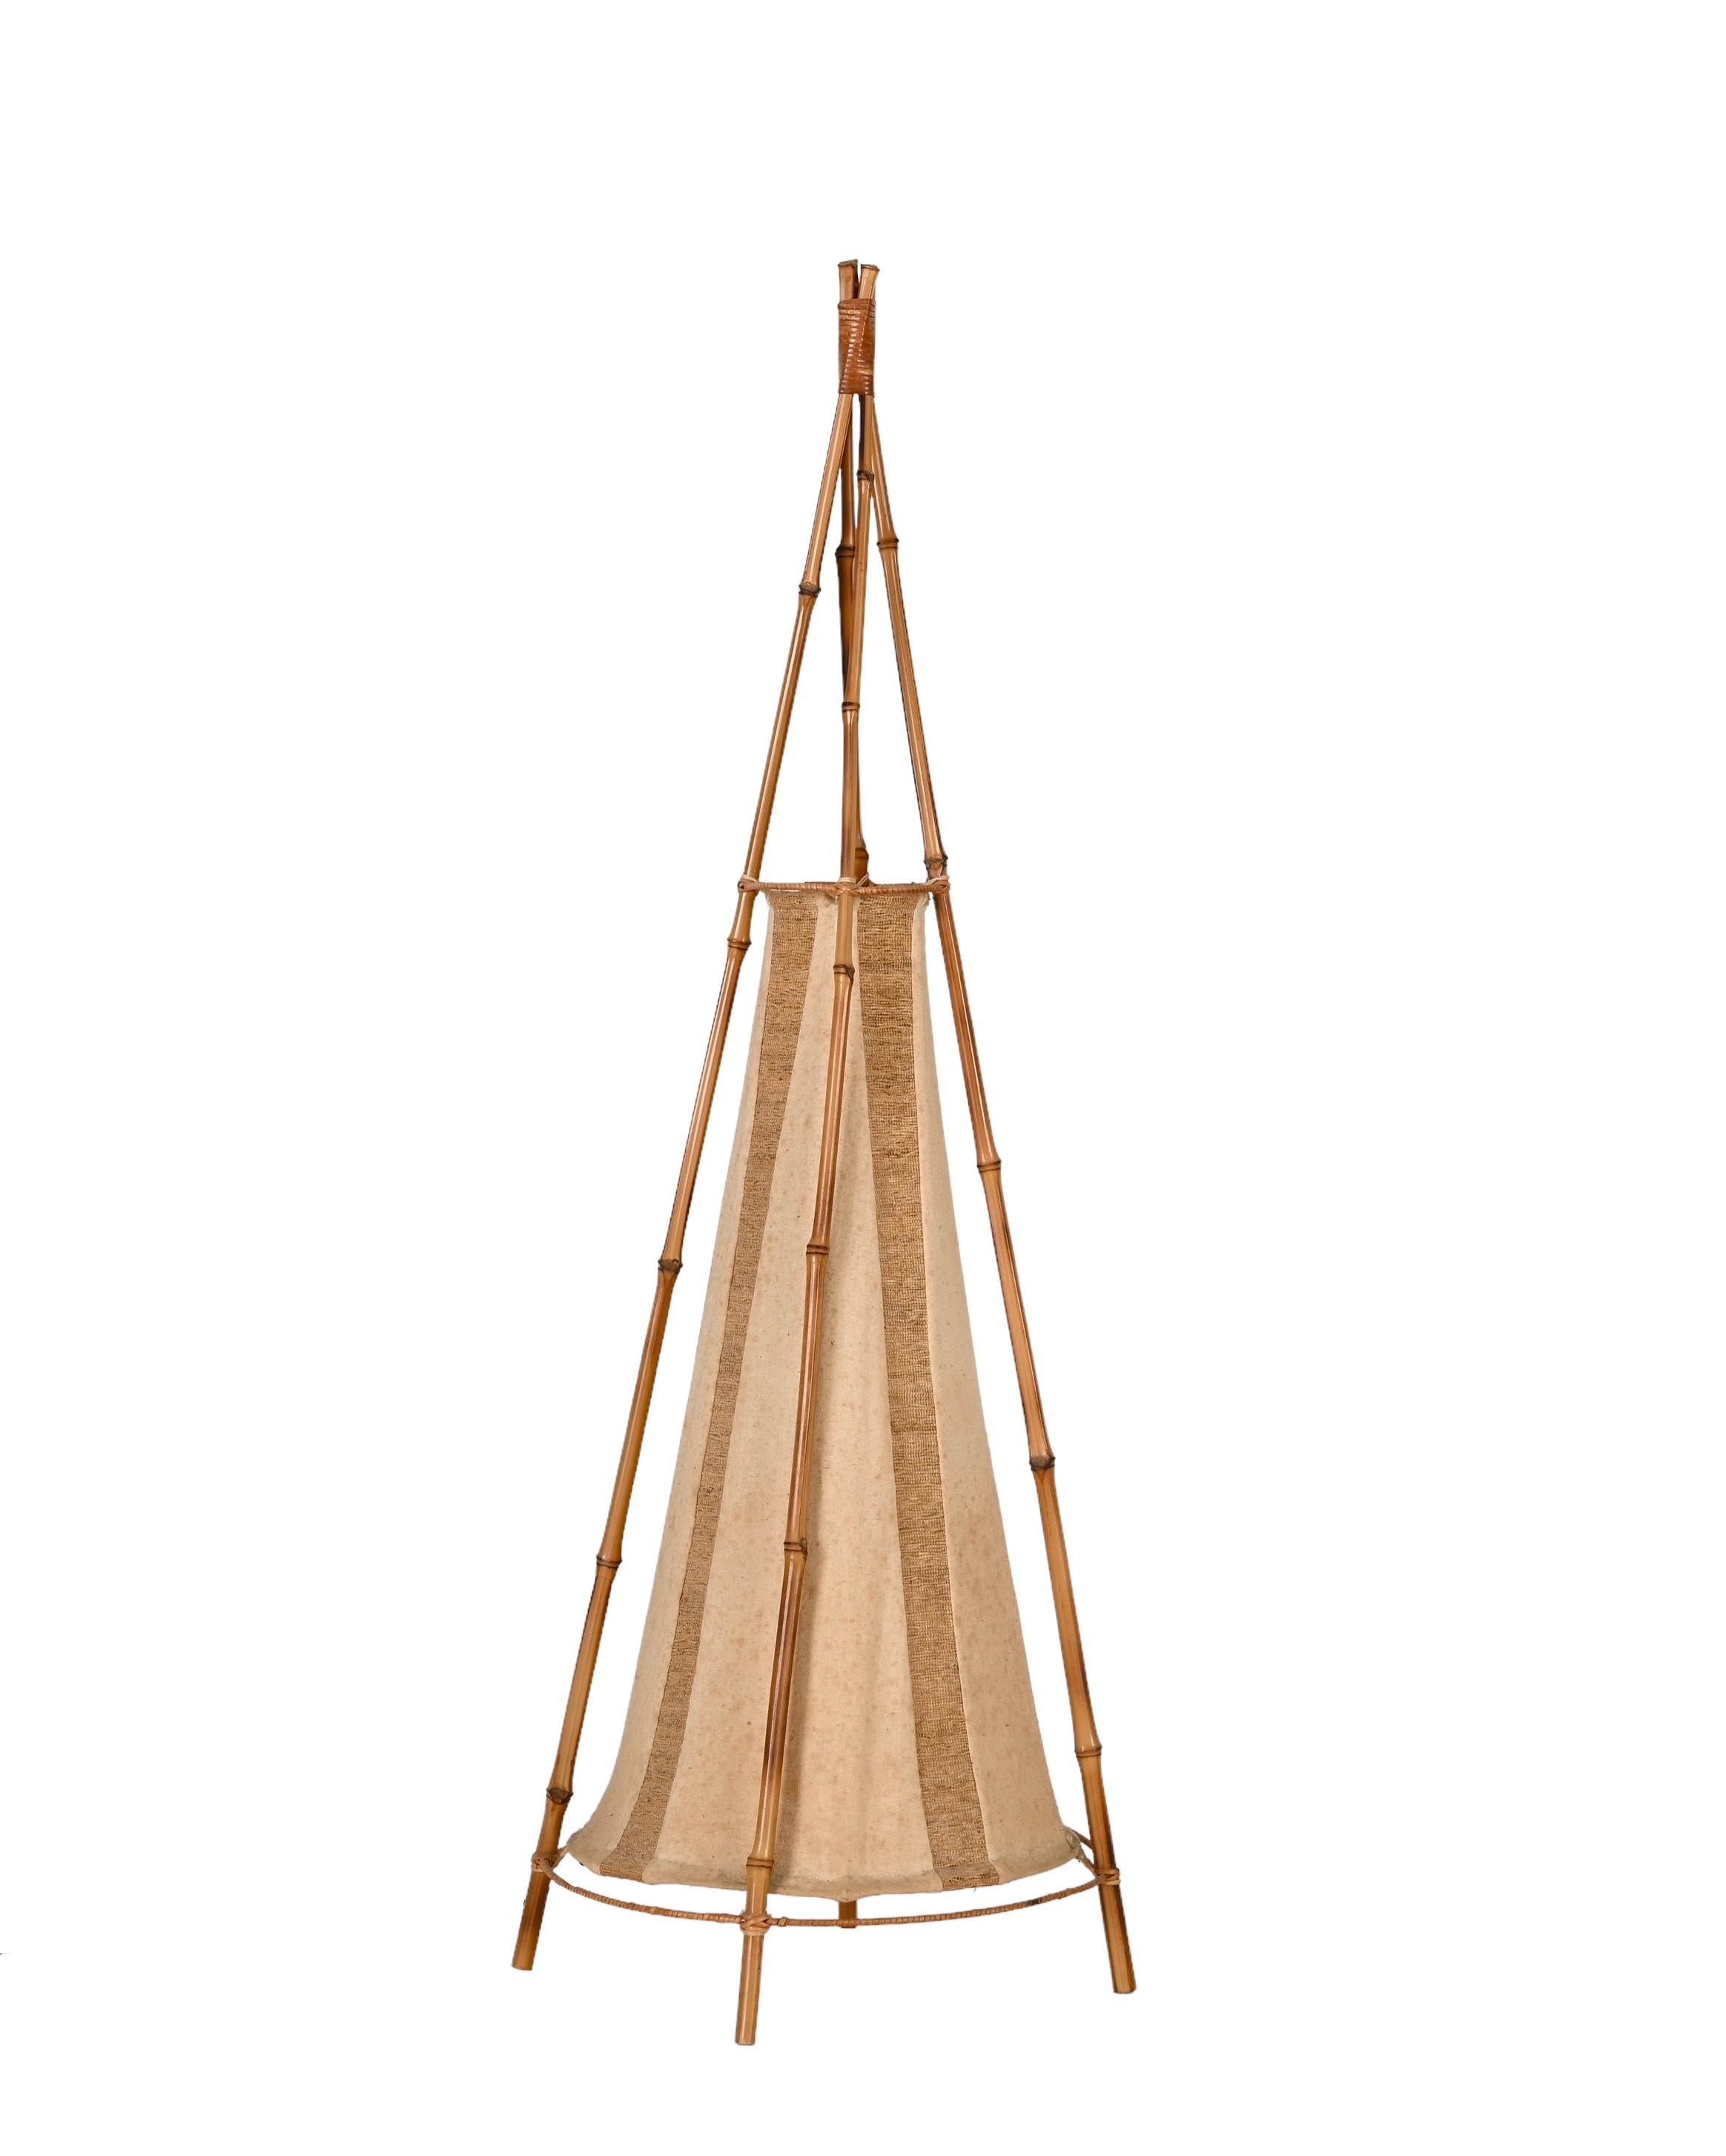 Louis Sognot Midcentury Cotton, Bamboo and Rattan Italian Table Lamp, 1960s For Sale 5